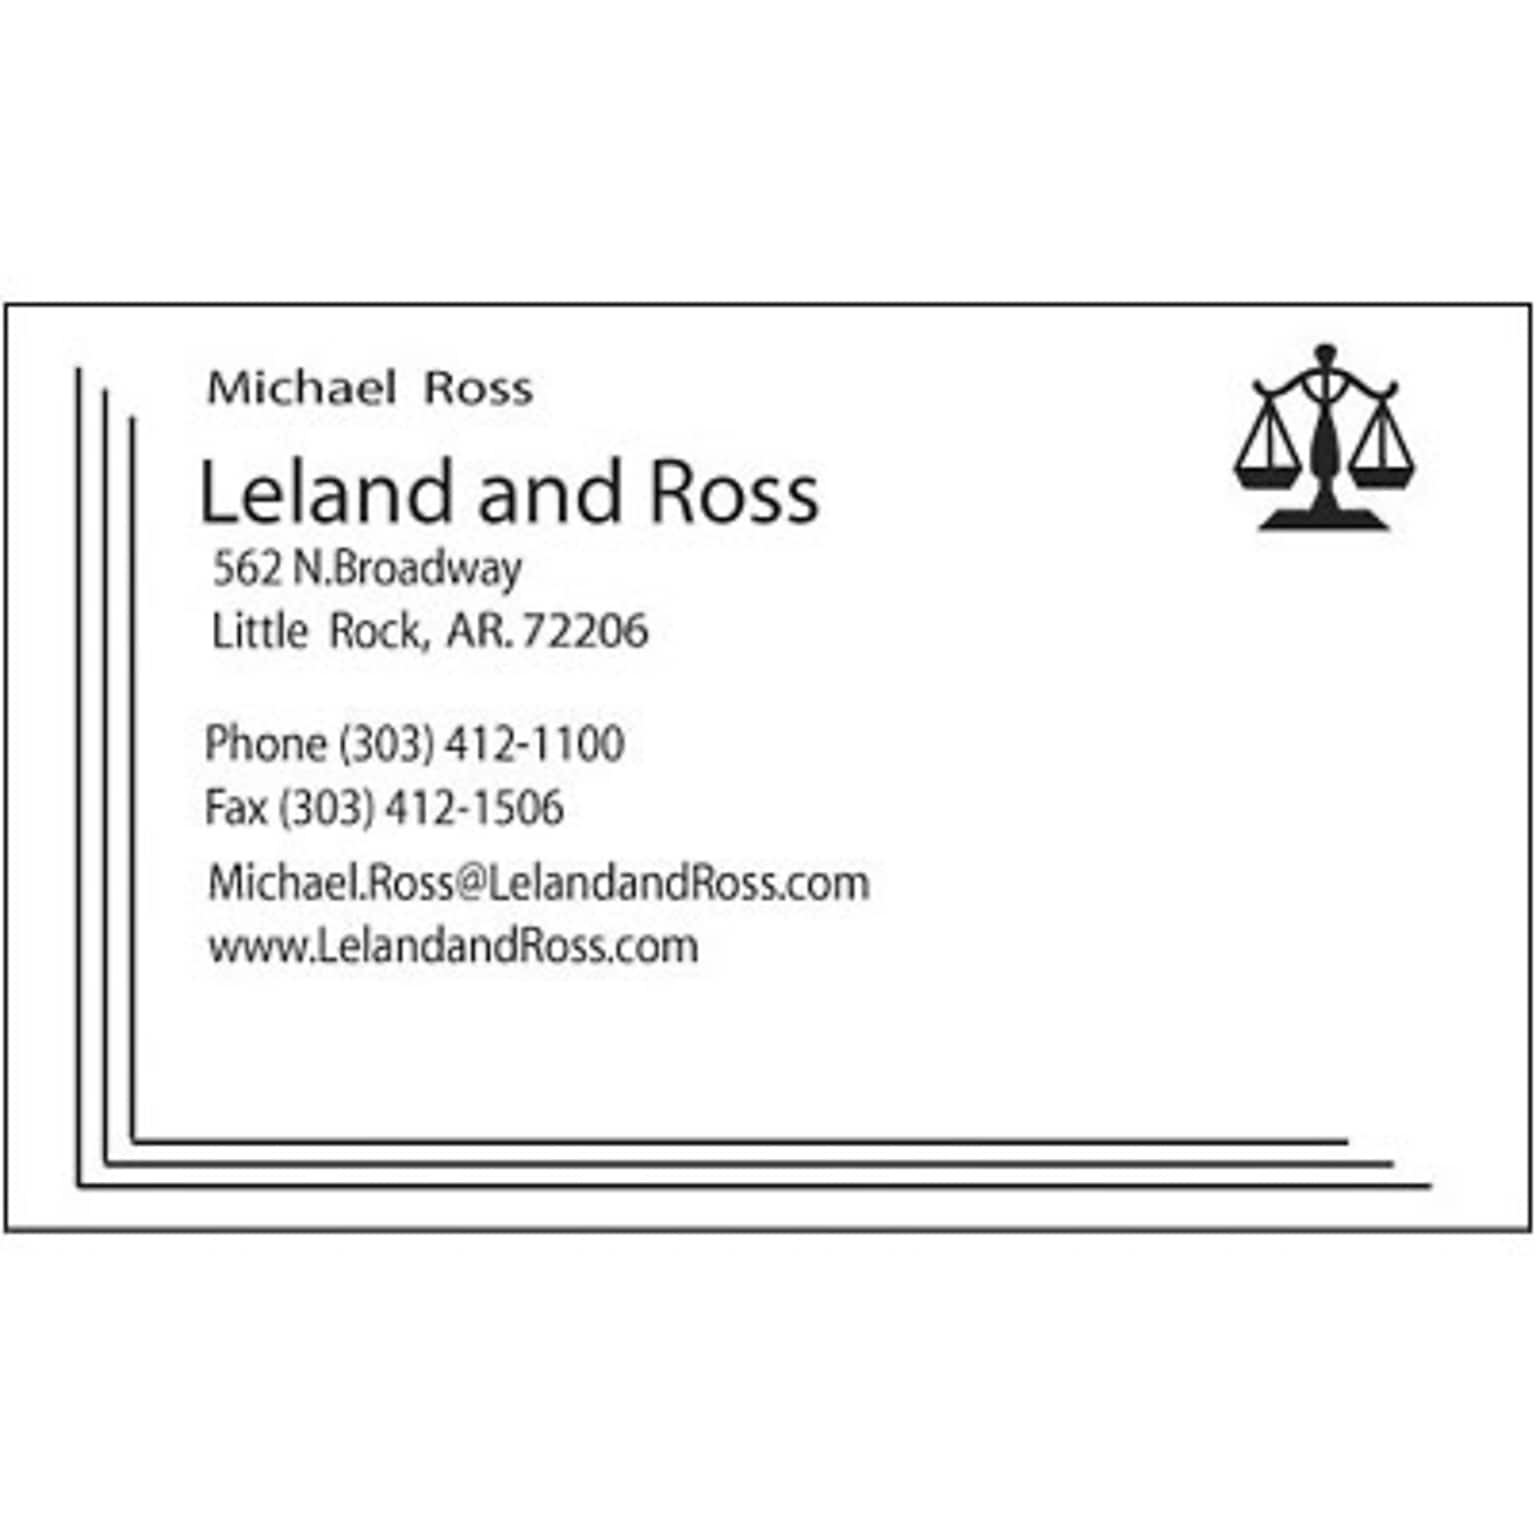 Custom 1-2 Color Business Cards, CLASSIC® Linen Natural White 80#, Raised Print, 1 Standard Ink, 1-Sided, 250/PK